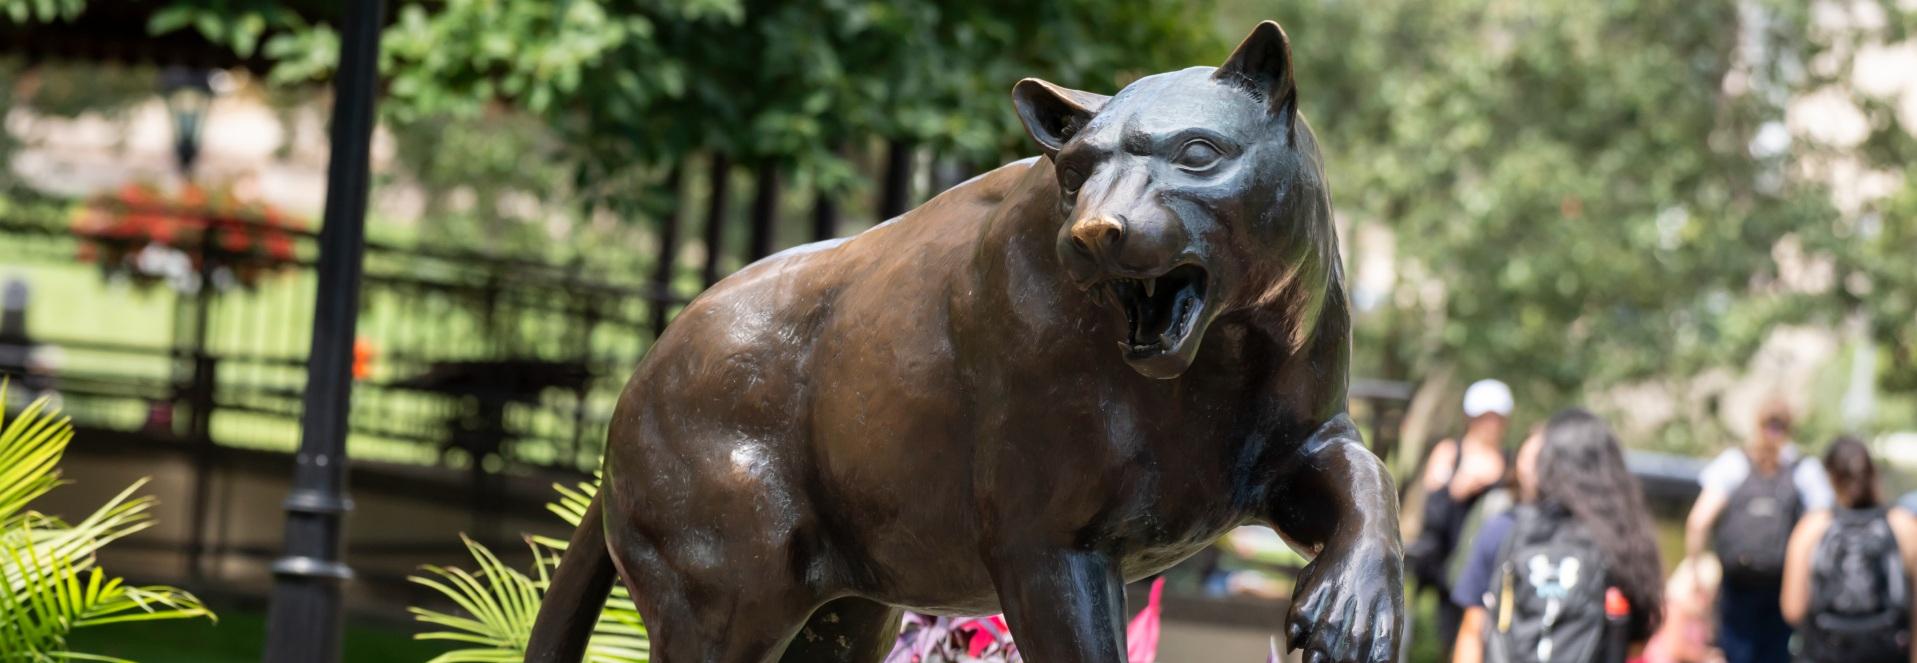 Photo of the panther statue from the University of Pittsburgh campus